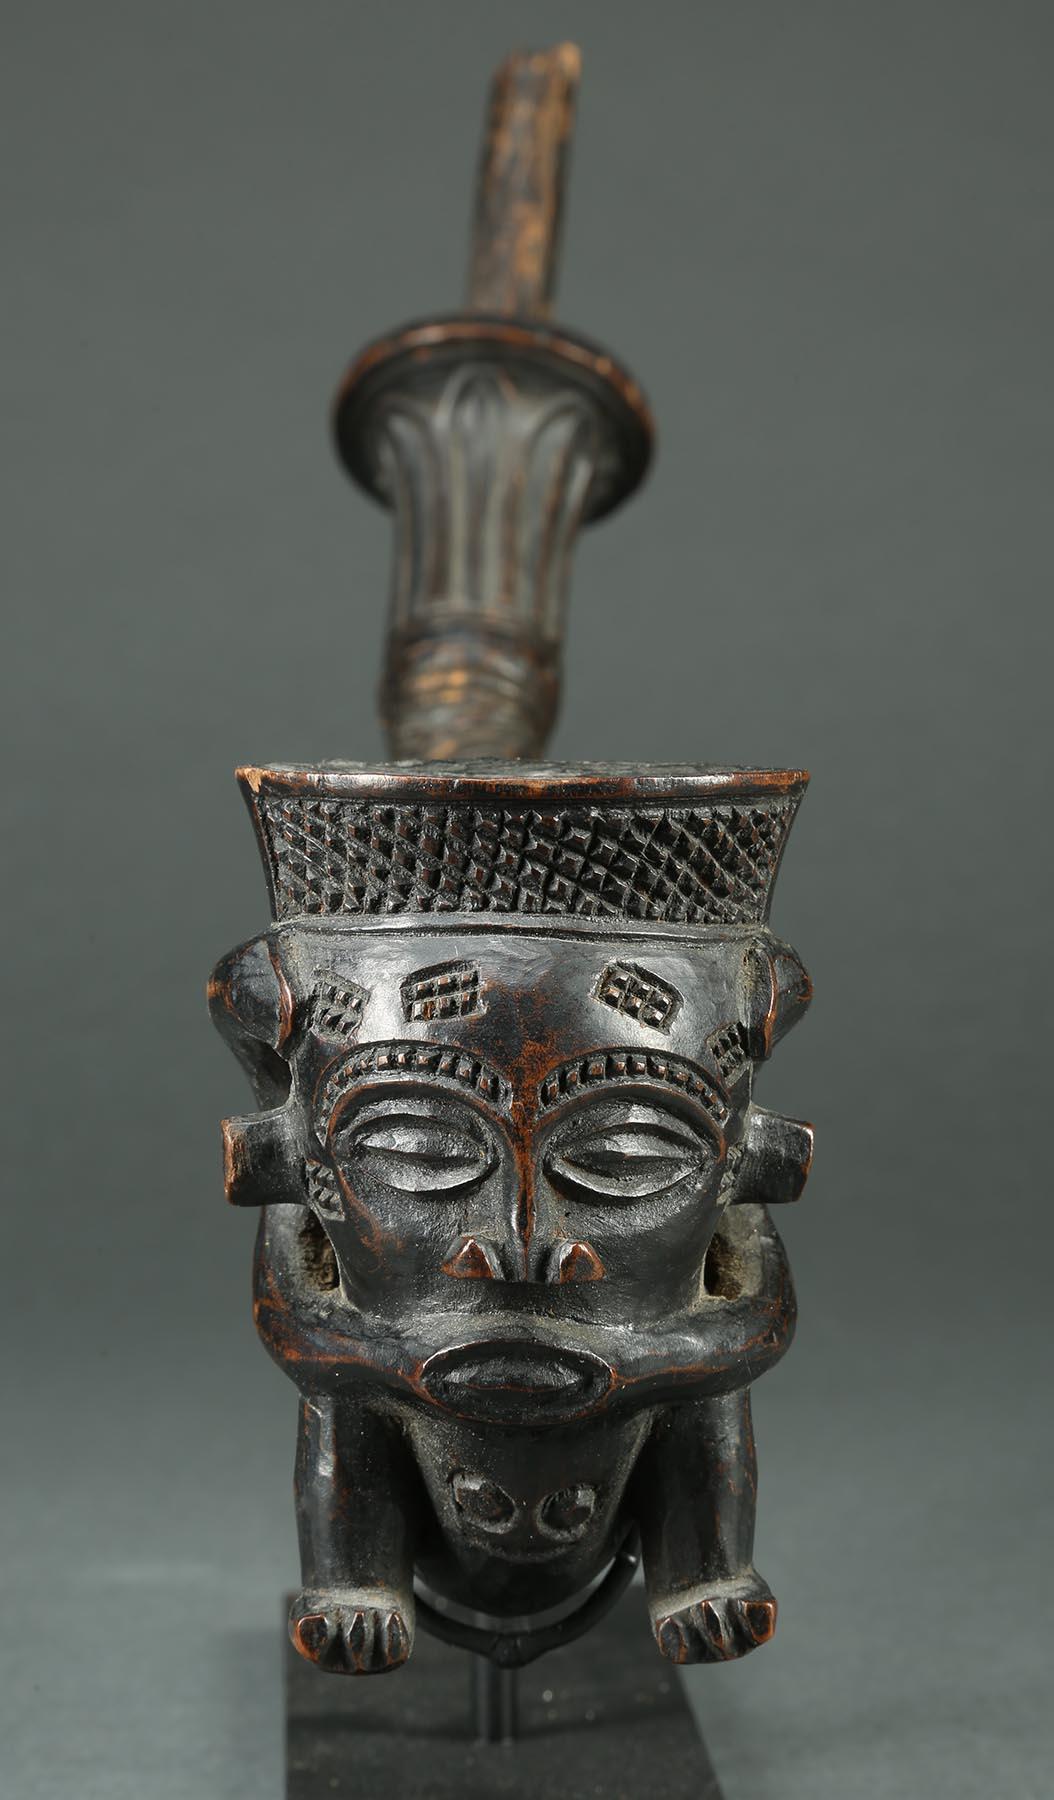 Fine Kuba Wood Figural Tribal African Pipe, early 20th century 

Kuba pipe with squatting figure on front, expressive face, geometric raised connected part with classic Kuba style design.  Abstract antelope mask on the stem.  In three parts, with